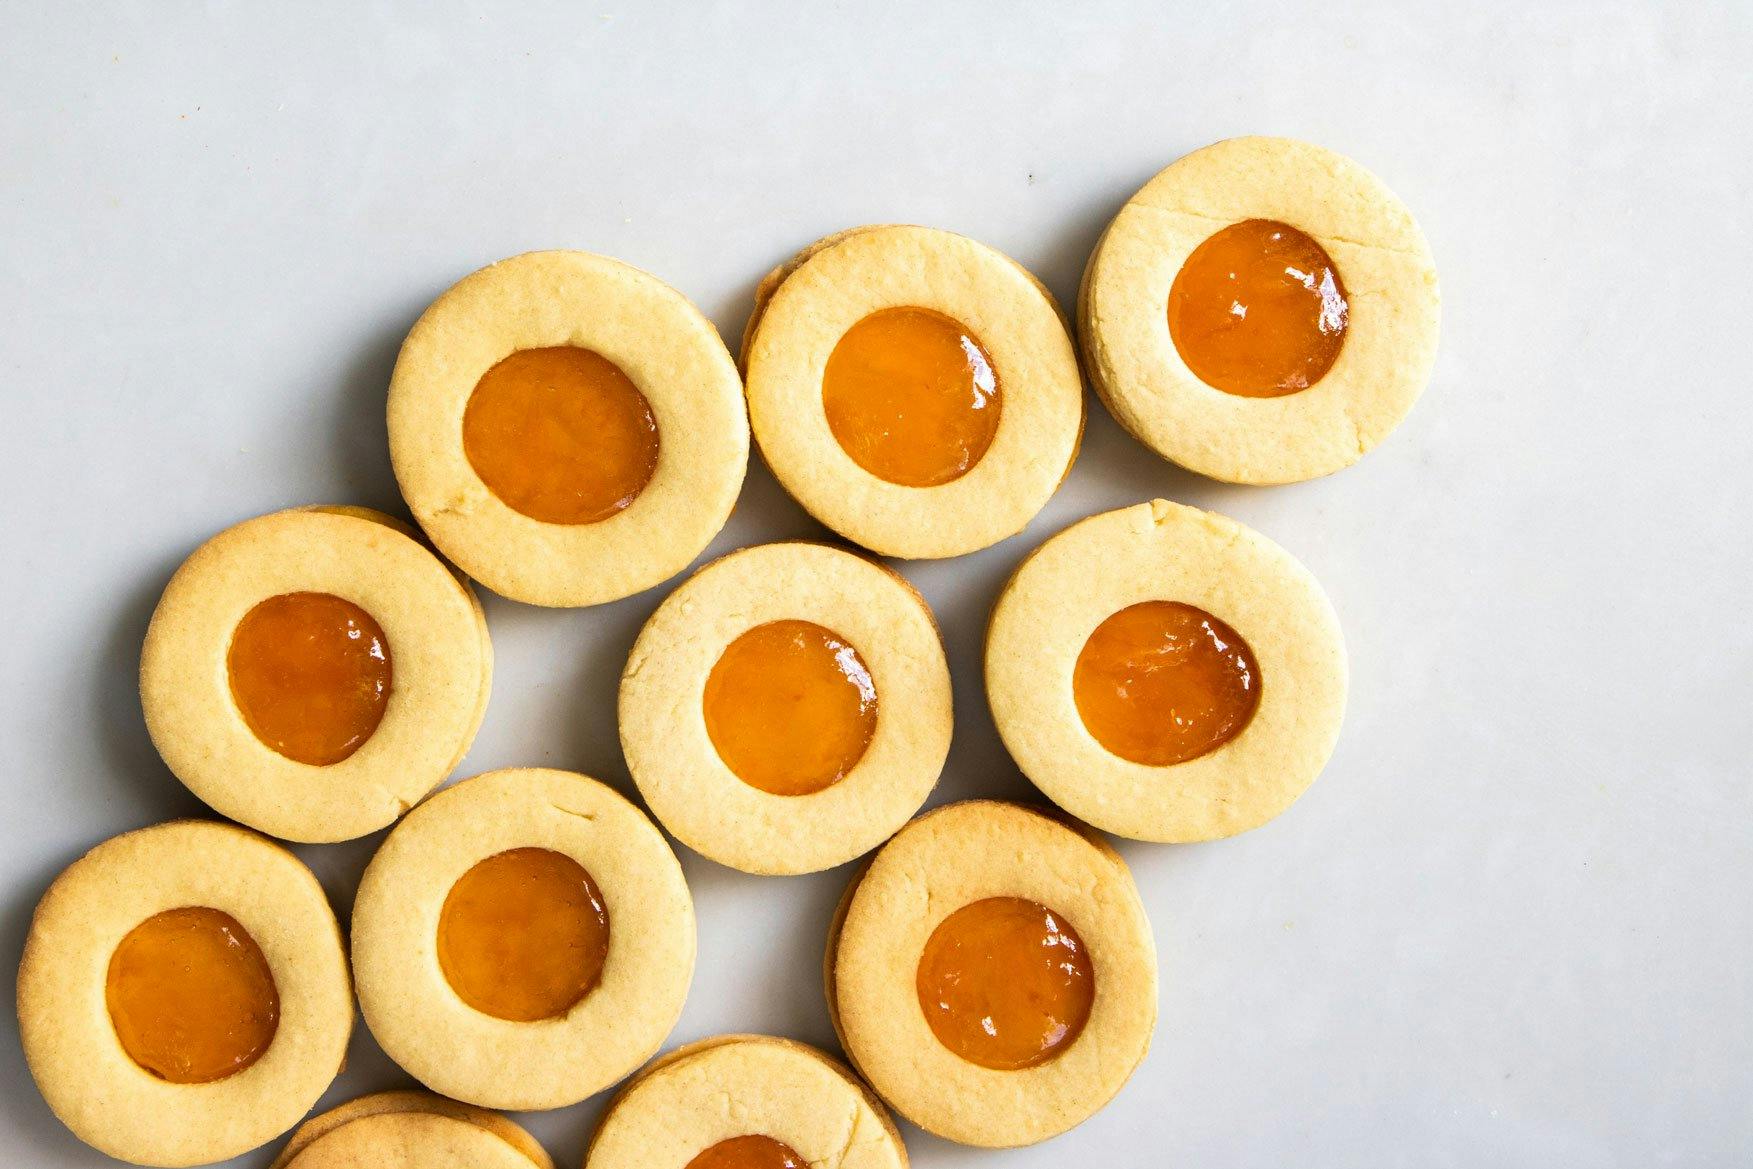 Close up image of apricot jam biscuits layed neatly next to each other on a table.